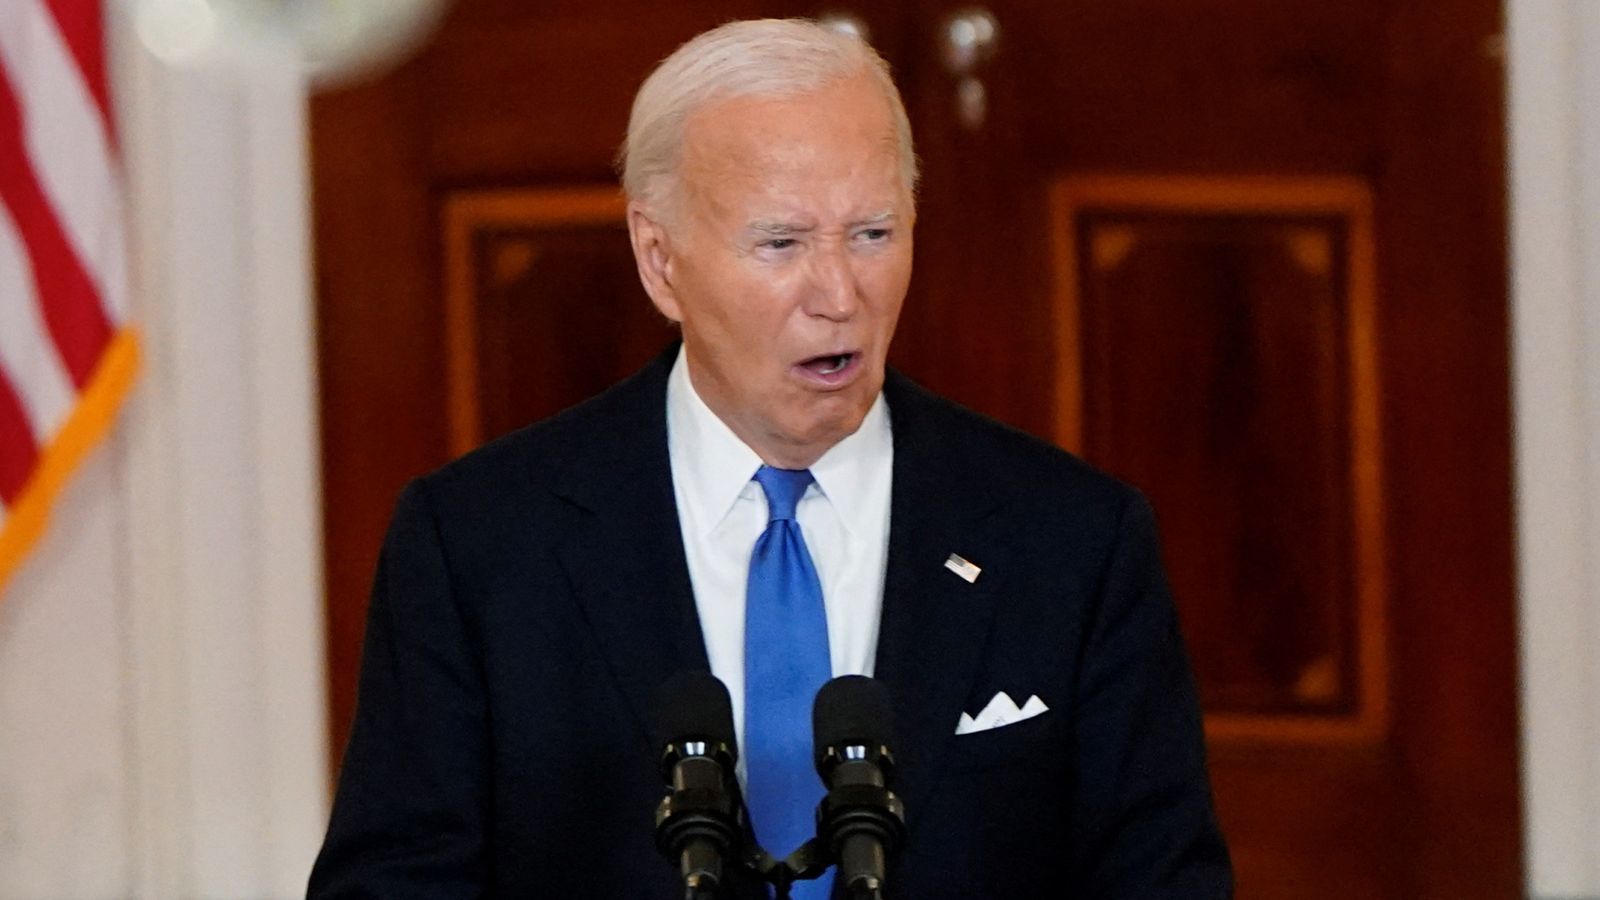 Biden says Supreme Court immunity ruling means presidents can 'ignore the law' - as Trump celebrates 'big win'